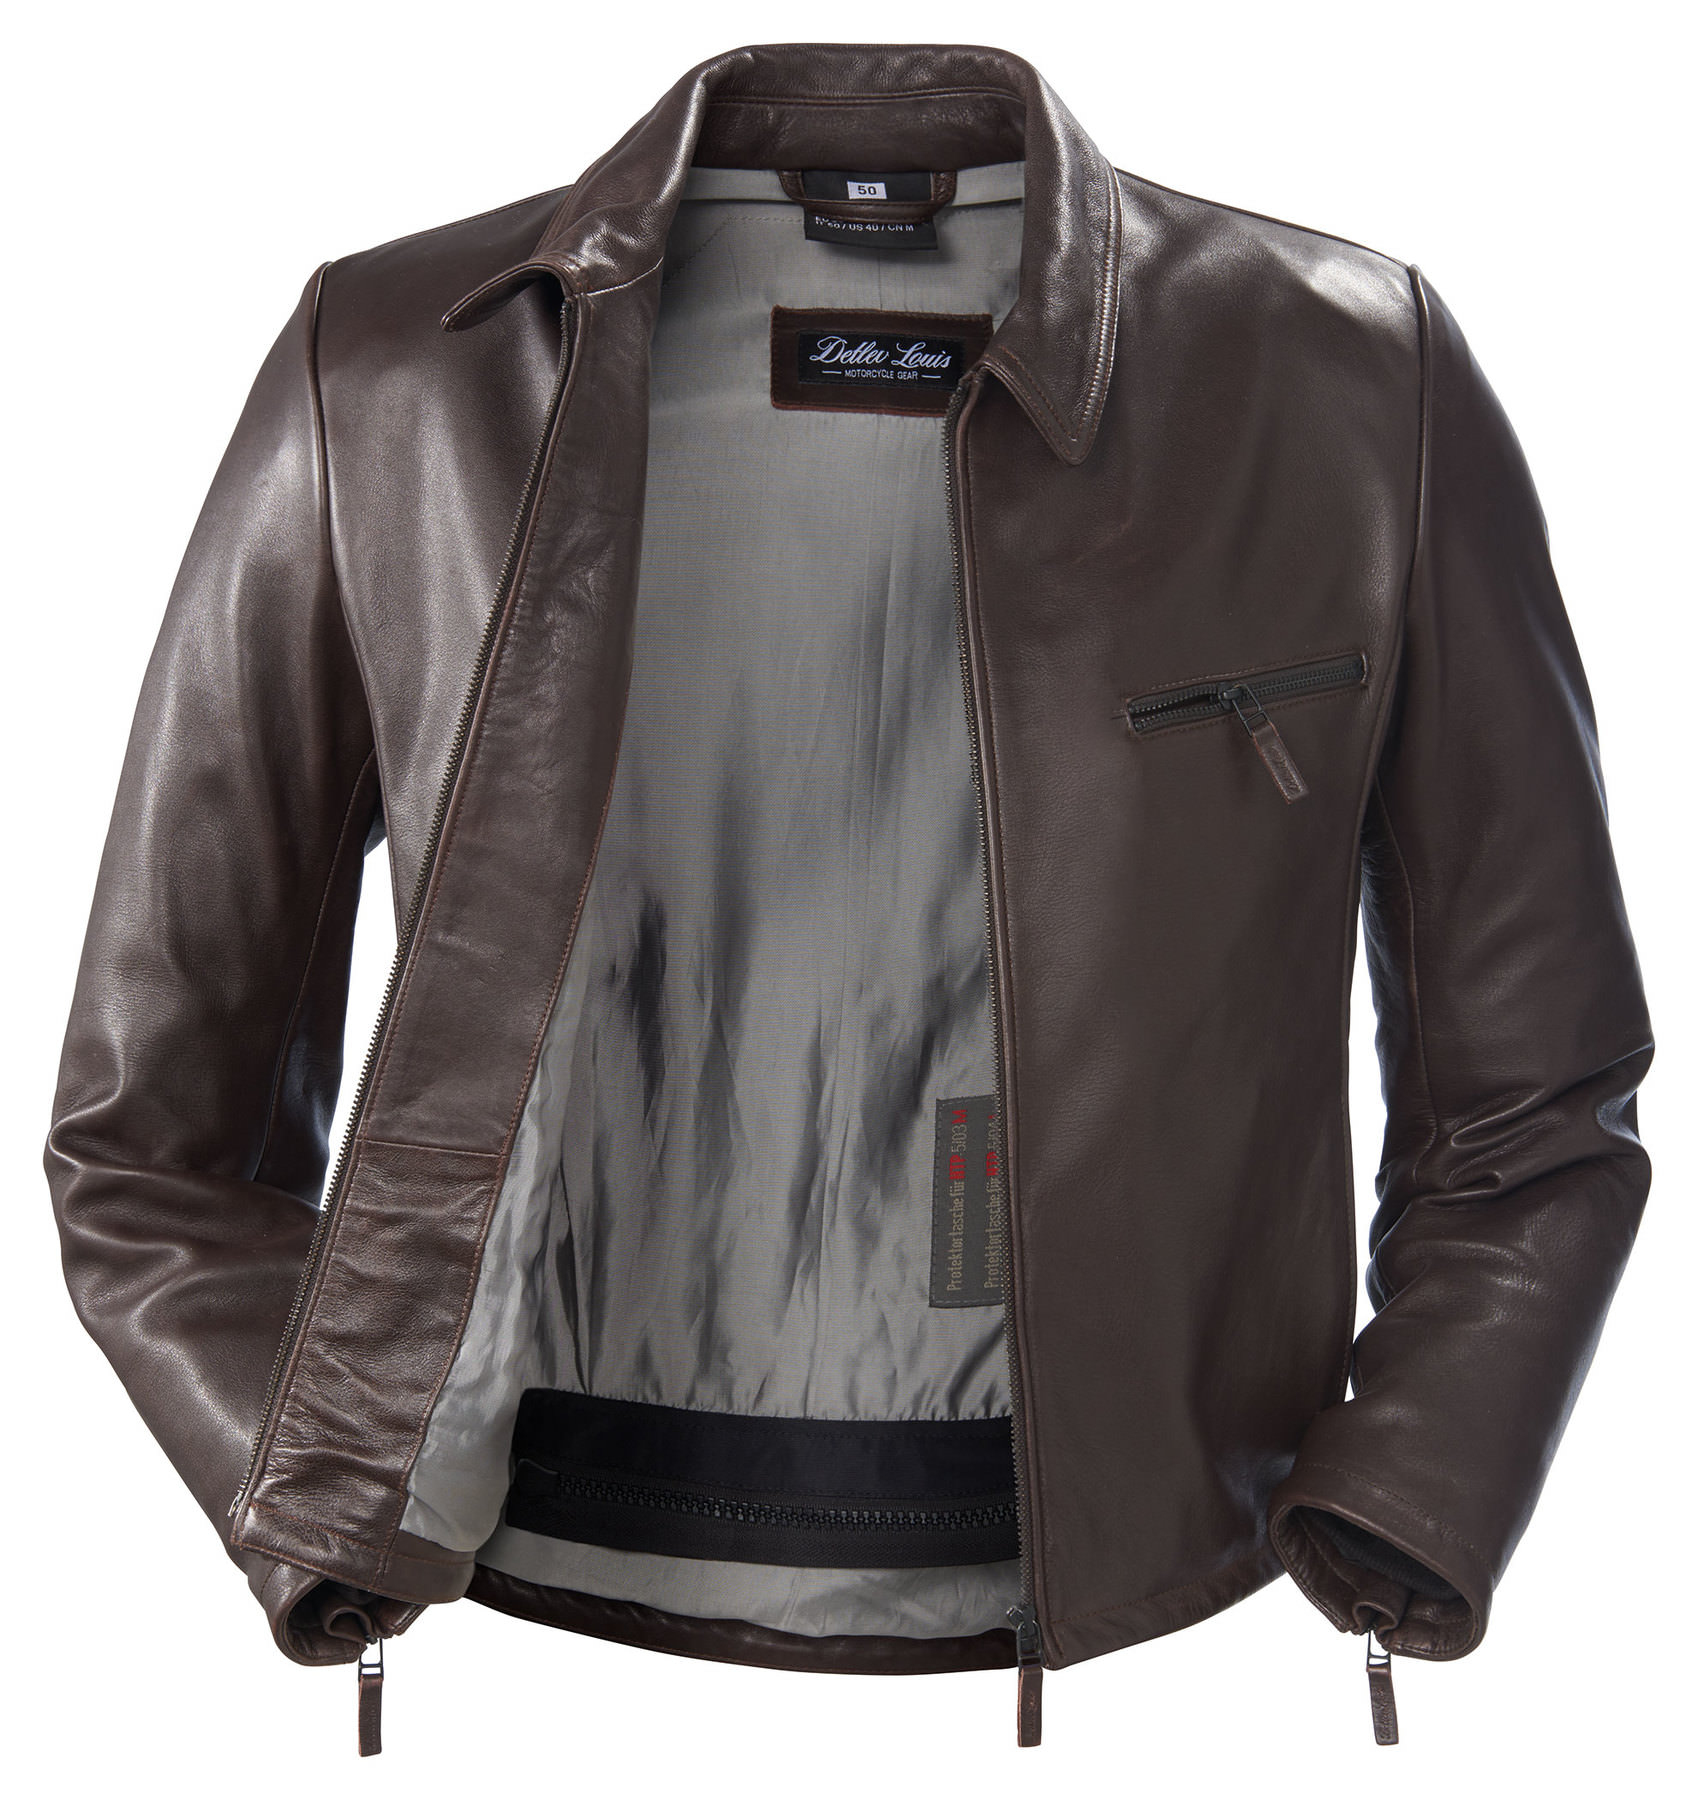 Buy Probiker PR-19 Jacket | Louis motorcycle clothing and 